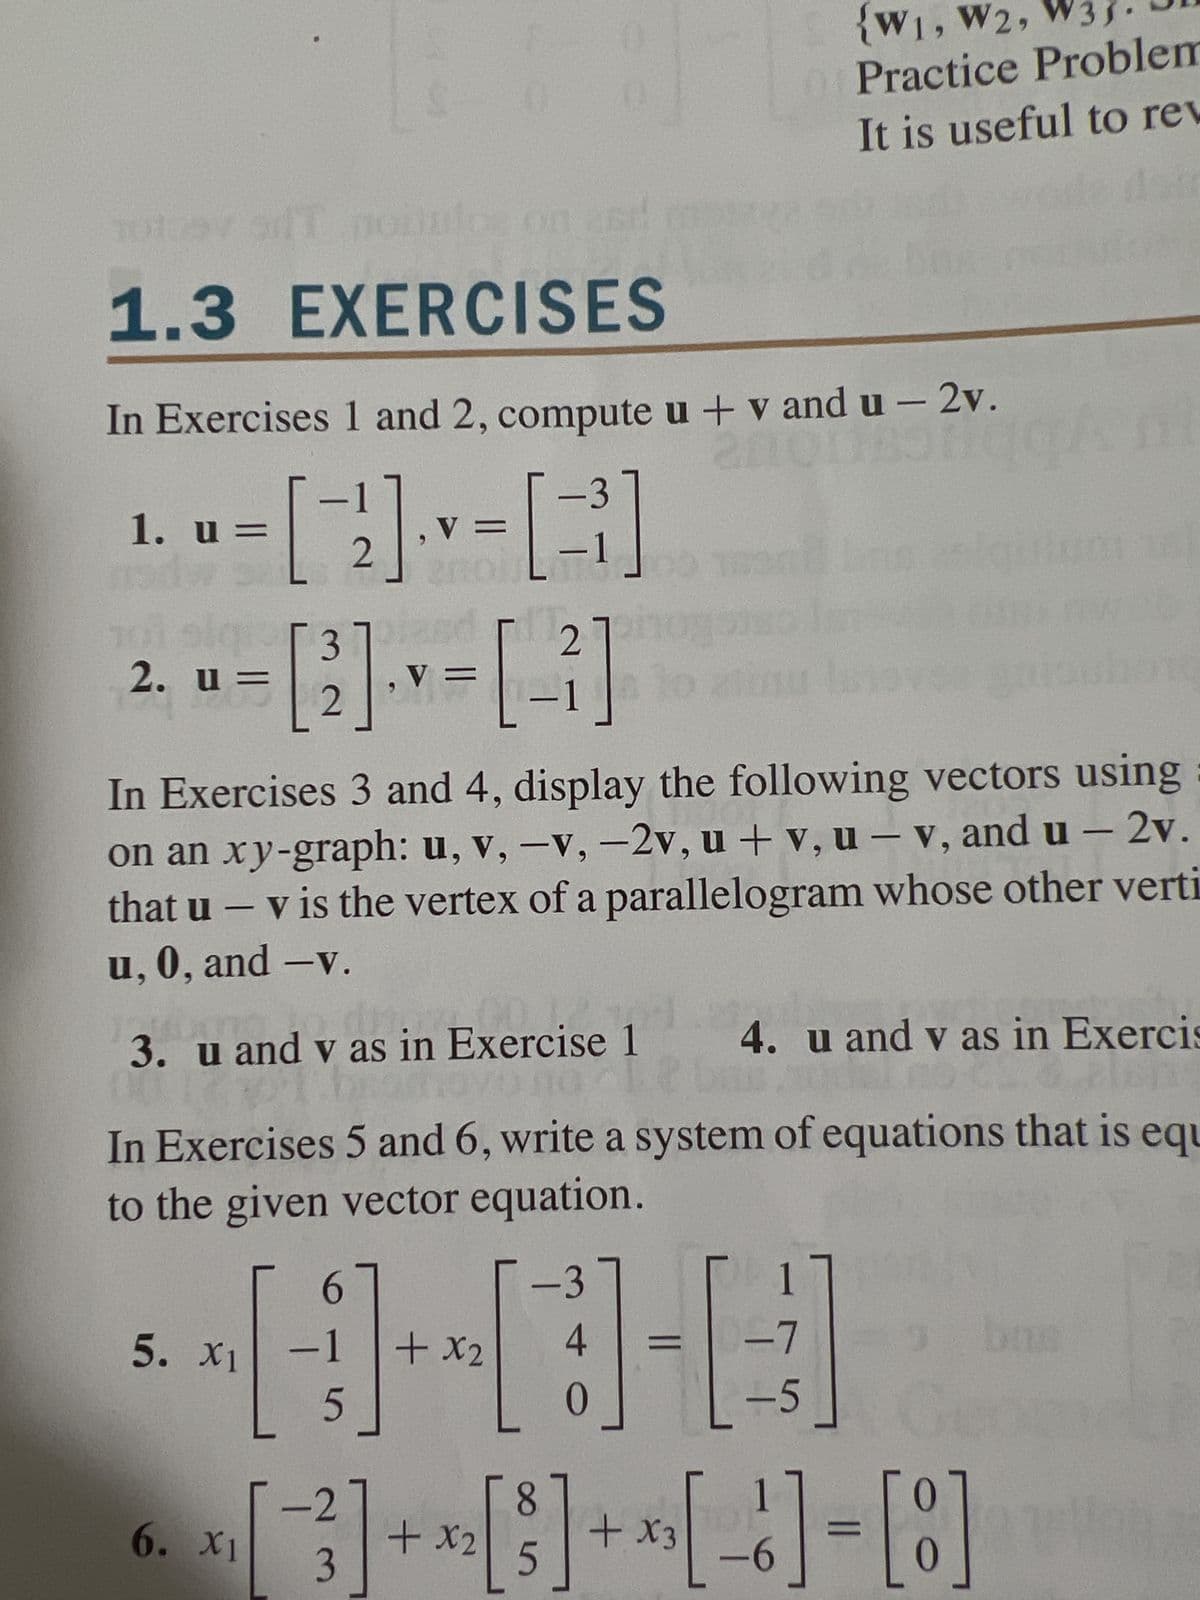 1.3 EXERCISES
In Exercises 1 and 2, compute u + vand u-2v.
anonas
1. u=
ni siq
2.
31
u =
u=
−1
V
[]+=B]
2
5. X1
6. X1
asd
V =
3
,
2
In Exercises 3 and 4, display the following vectors using
on an xy-graph: u, v, -v, -2v, u + v, u - v, and u-2v.
that u - v is the vertex of a parallelogram whose other verti
u, 0, and -v.
6
-1
[-]+
5
3. u and v as in Exercise 1
avo no It
In Exercises 5 and 6, write a system of equations that is equ
to the given vector equation.
-27
3
21
2700
+ x2
{W1, W2, W
Practice Problem
It is useful to rev
-3
4
-7
[][]
0
-5
+ x2
8
5
4. u and v as in Exercis
del no 23.& plen
3
bus
+ x₁ [ 6 ] = [8]
X3
-6